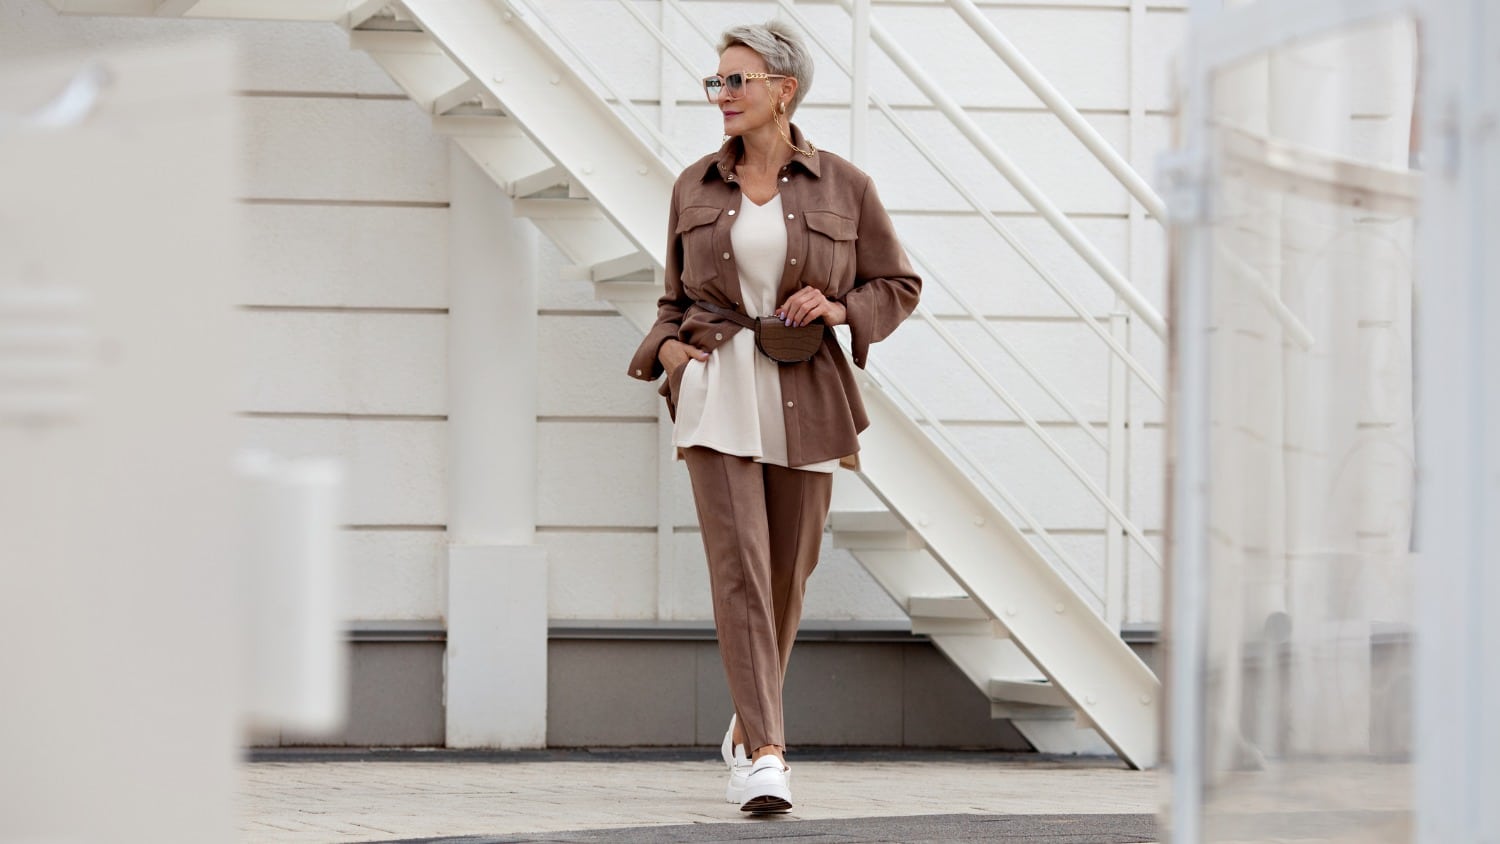 Tan Blazer with Tapered Pants Outfits For Women (6 ideas & outfits